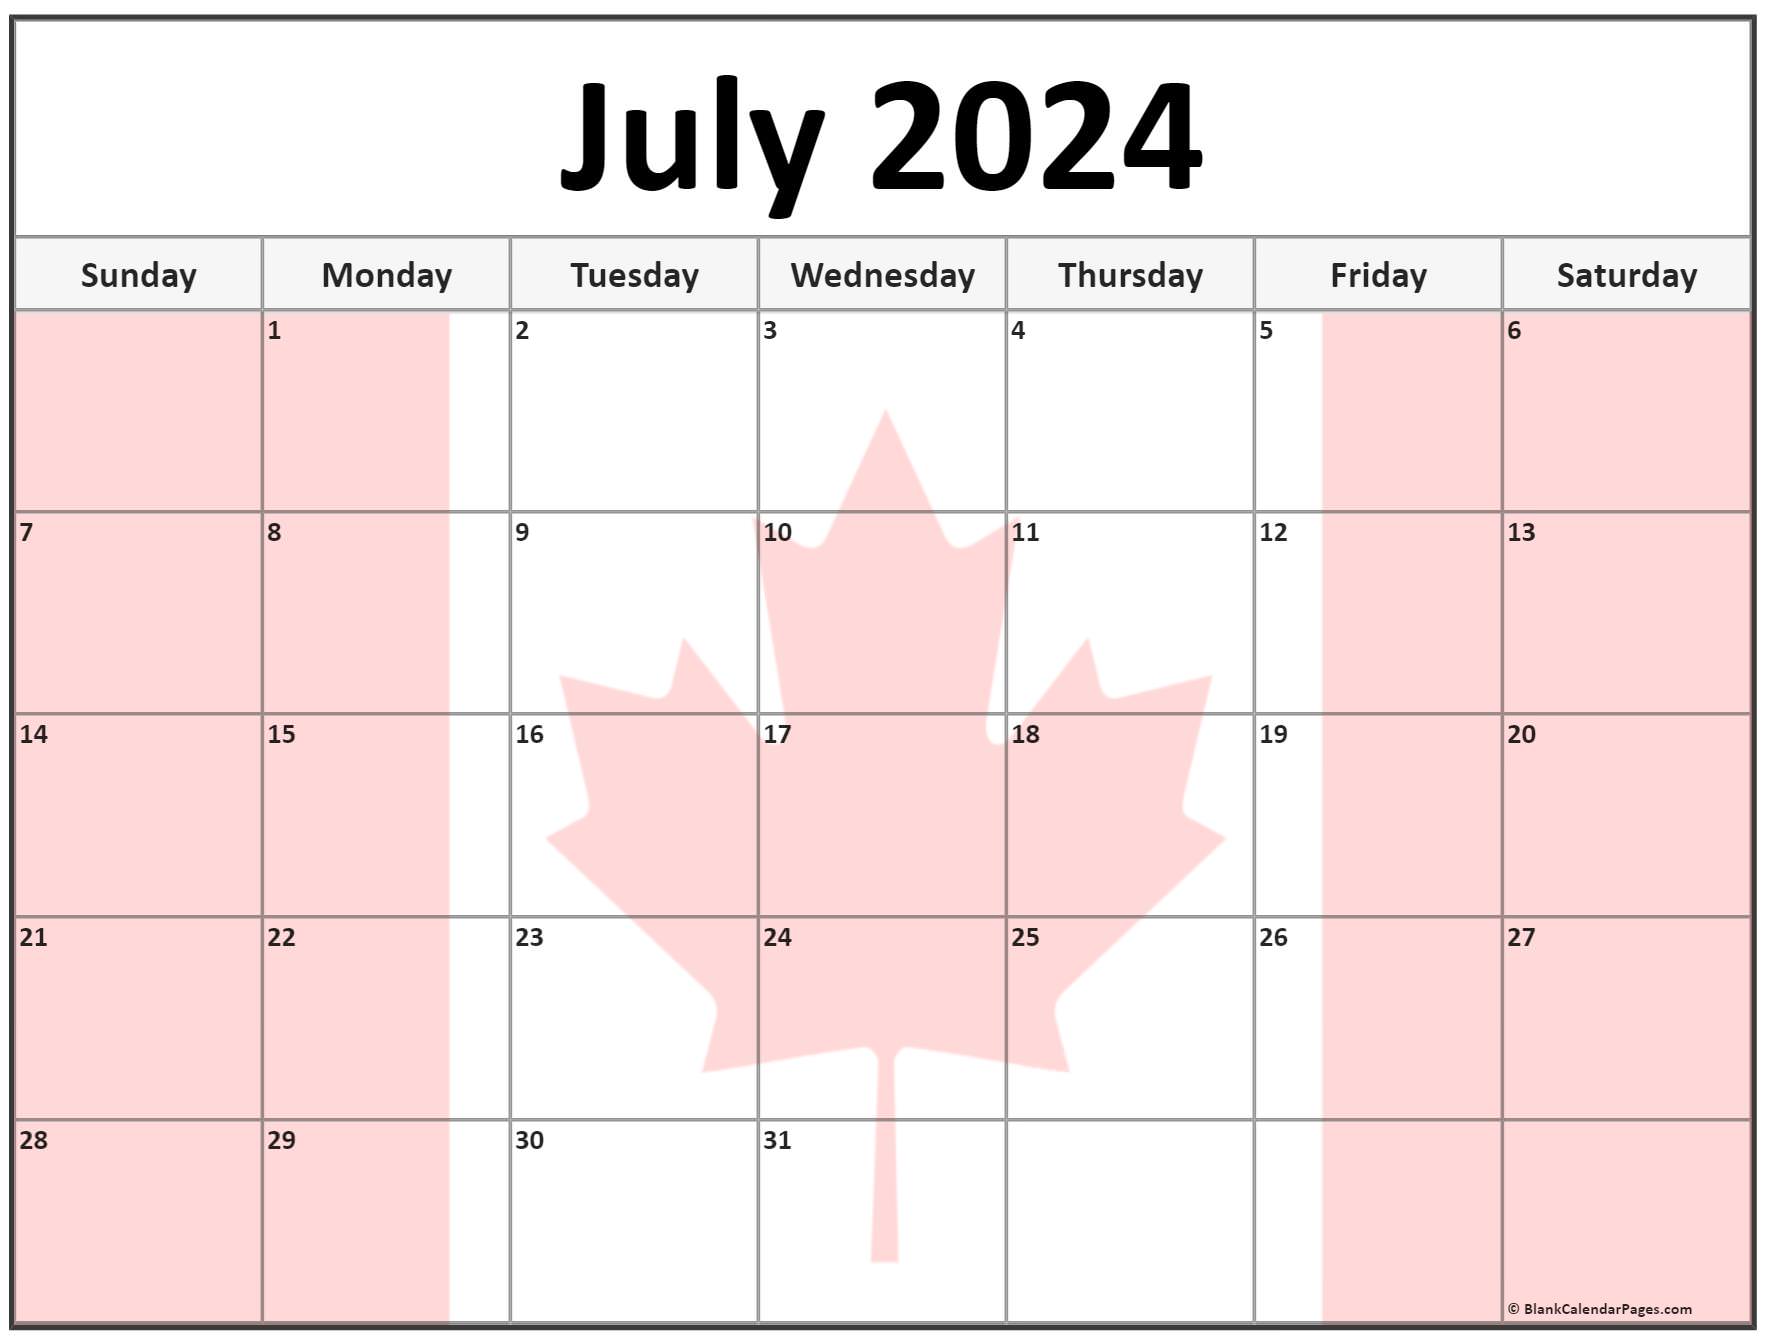 Collection of July 2024 photo calendars with image filters.